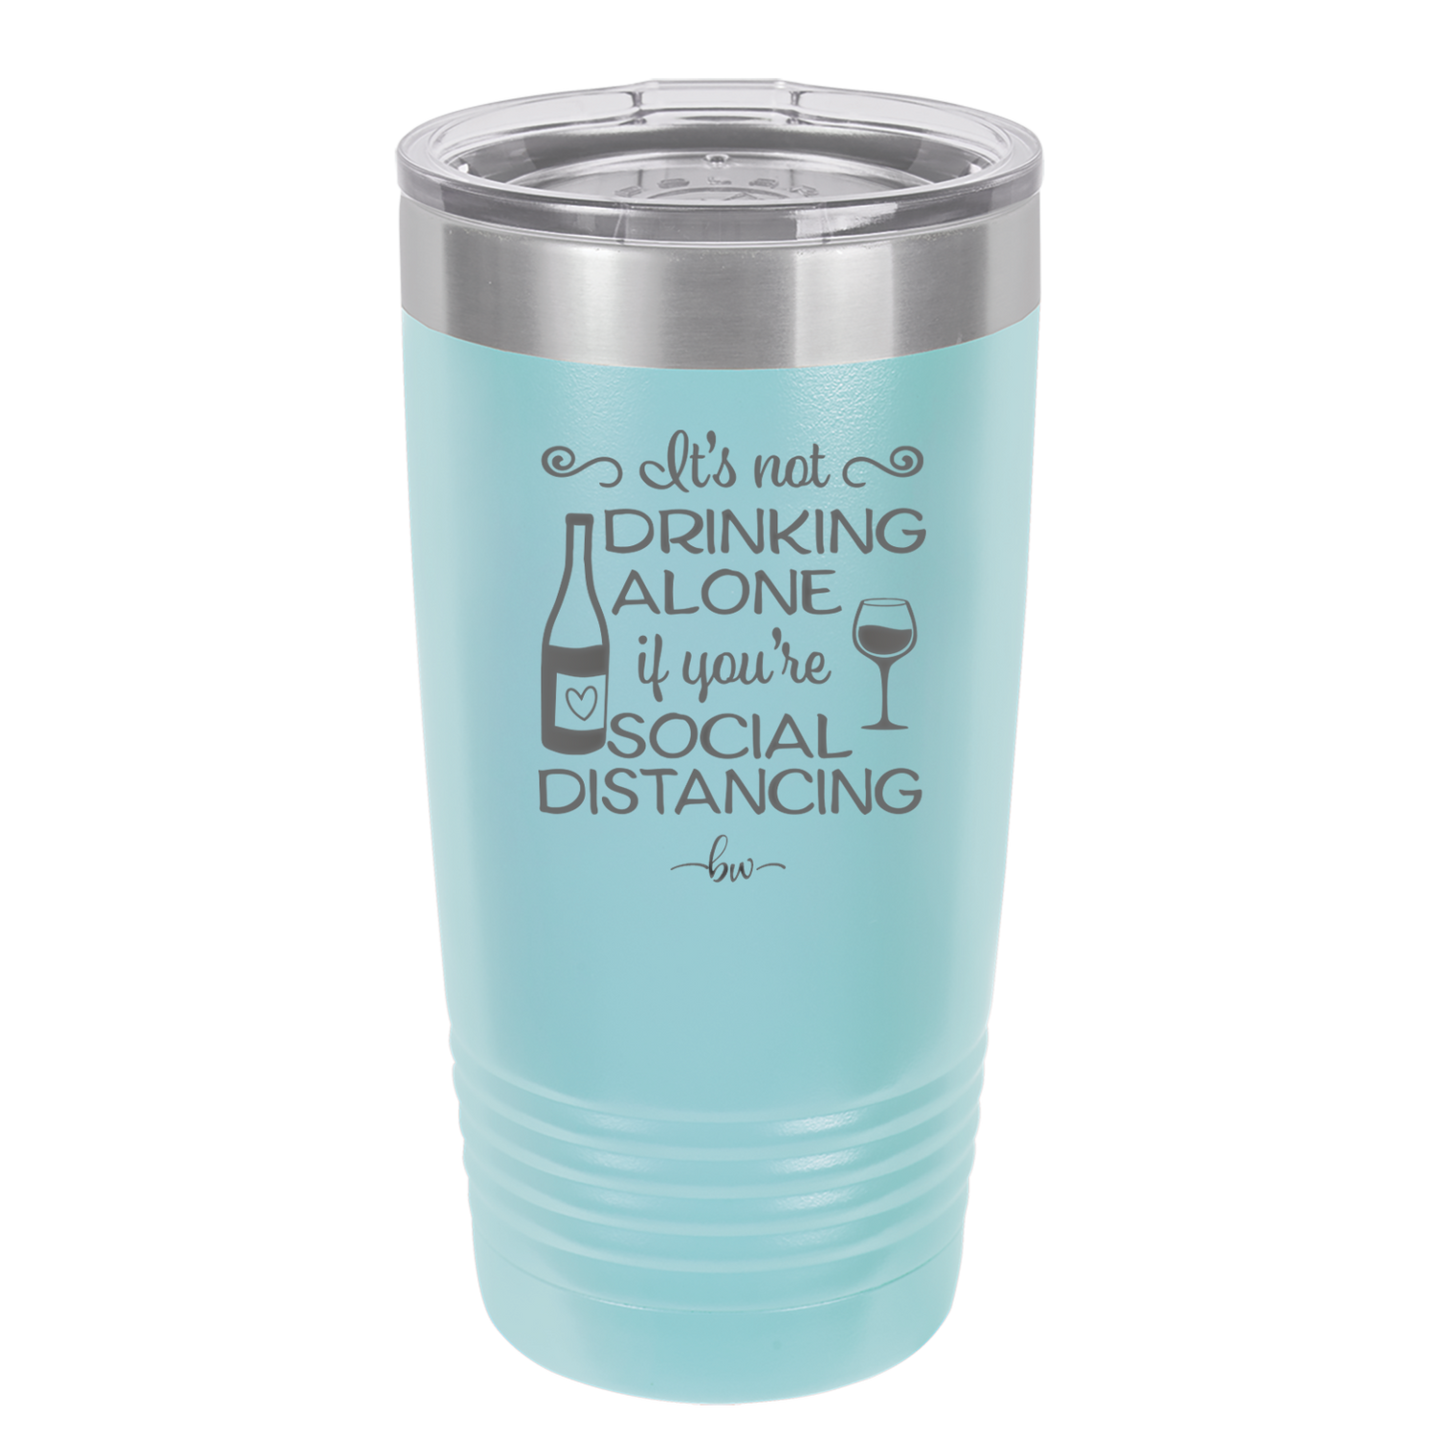 It's Not Drinking Alone if You're Social Distancing - Laser Engraved Stainless Steel Drinkware - 1291 -